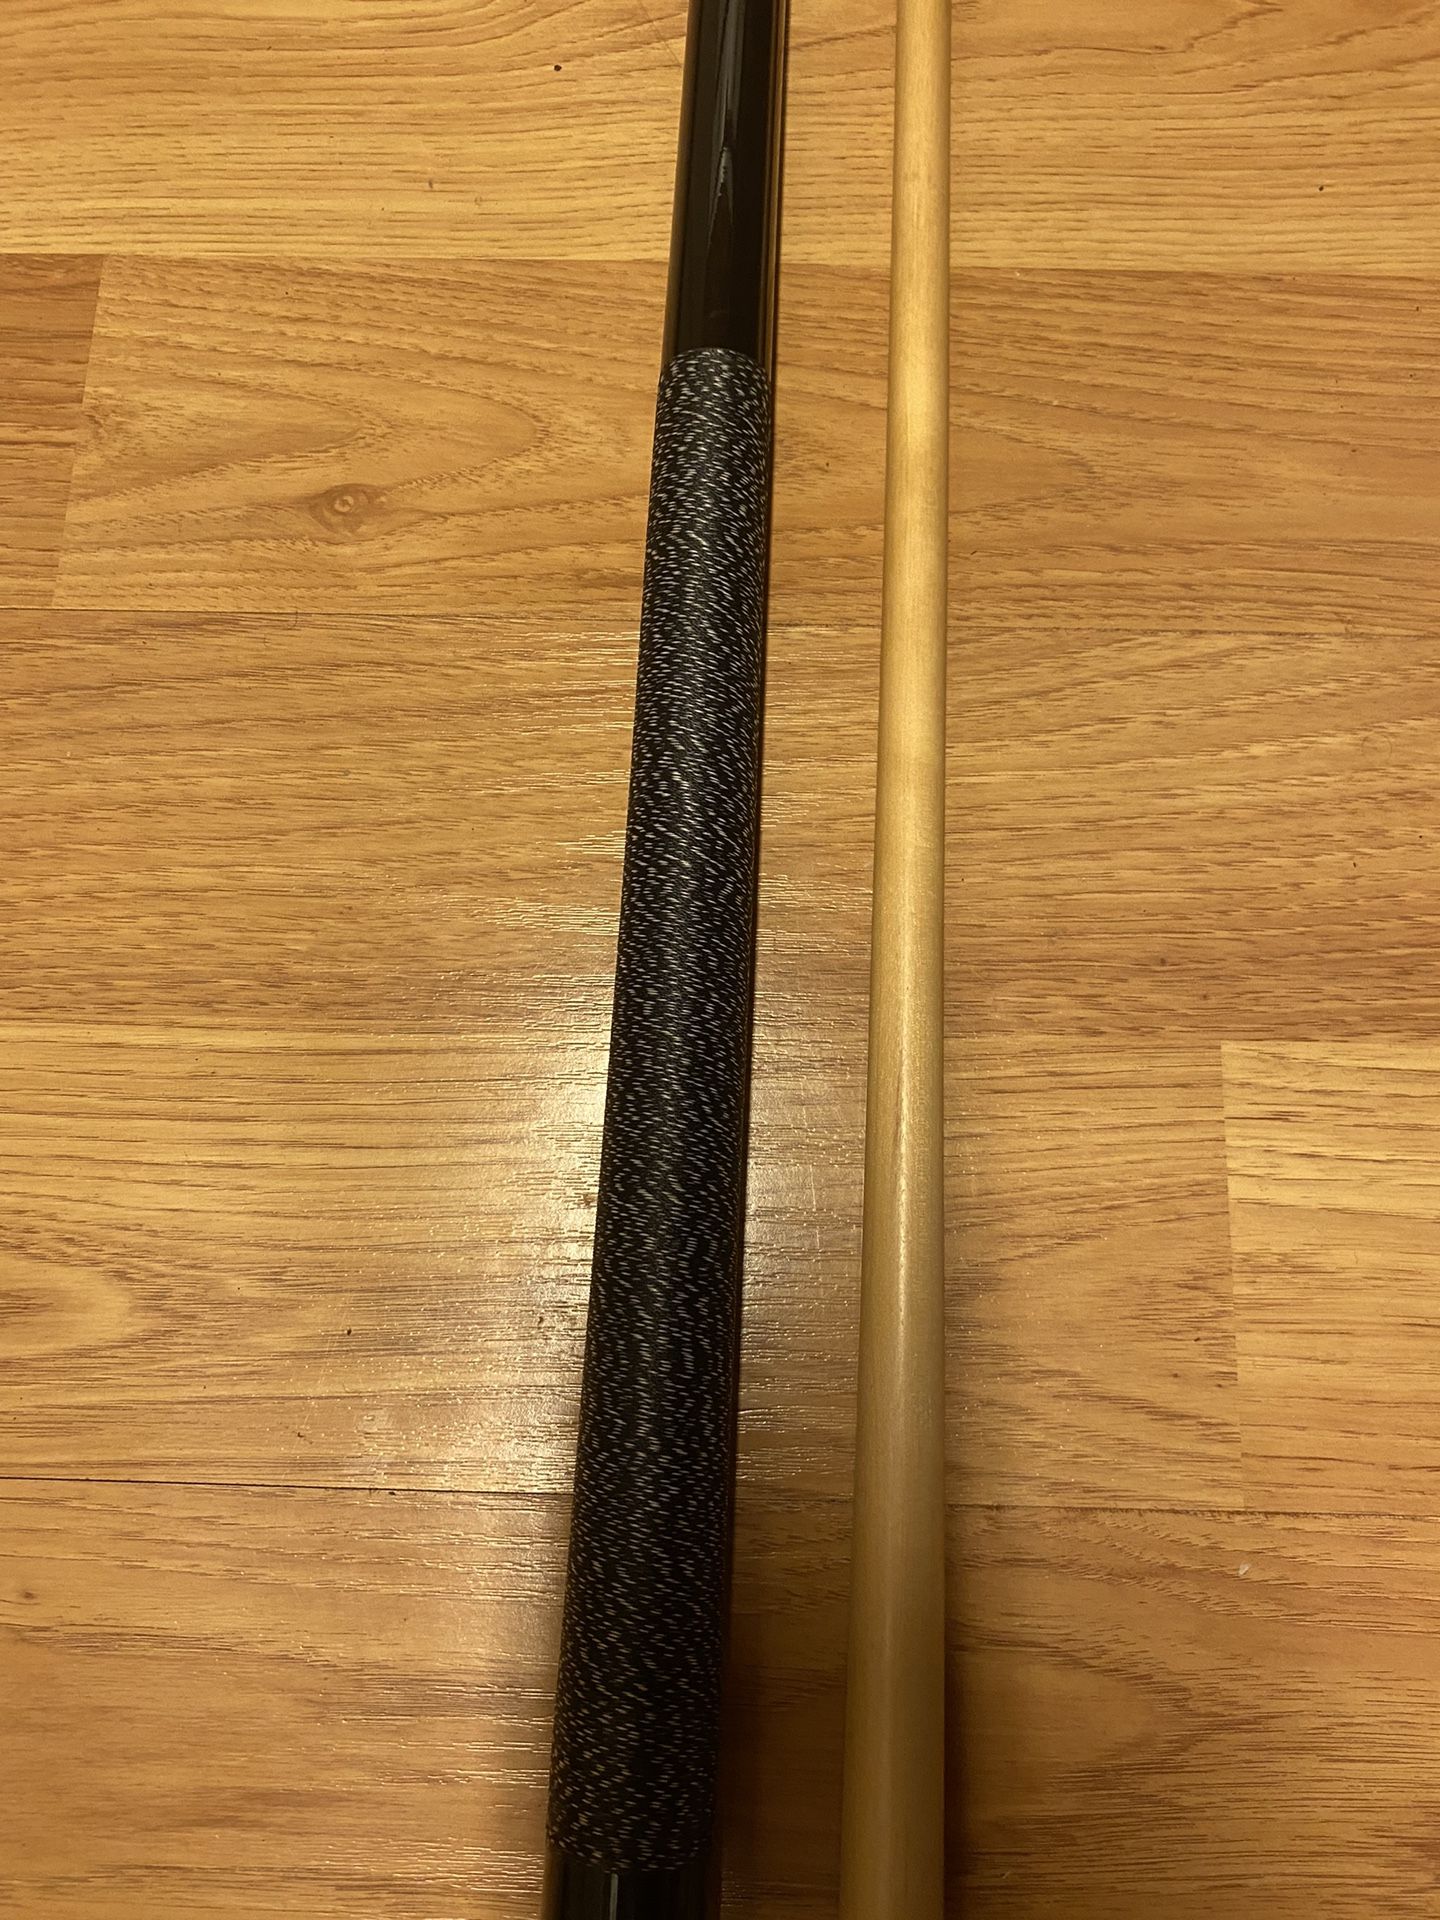 Two Action Pool Cues/Sticks